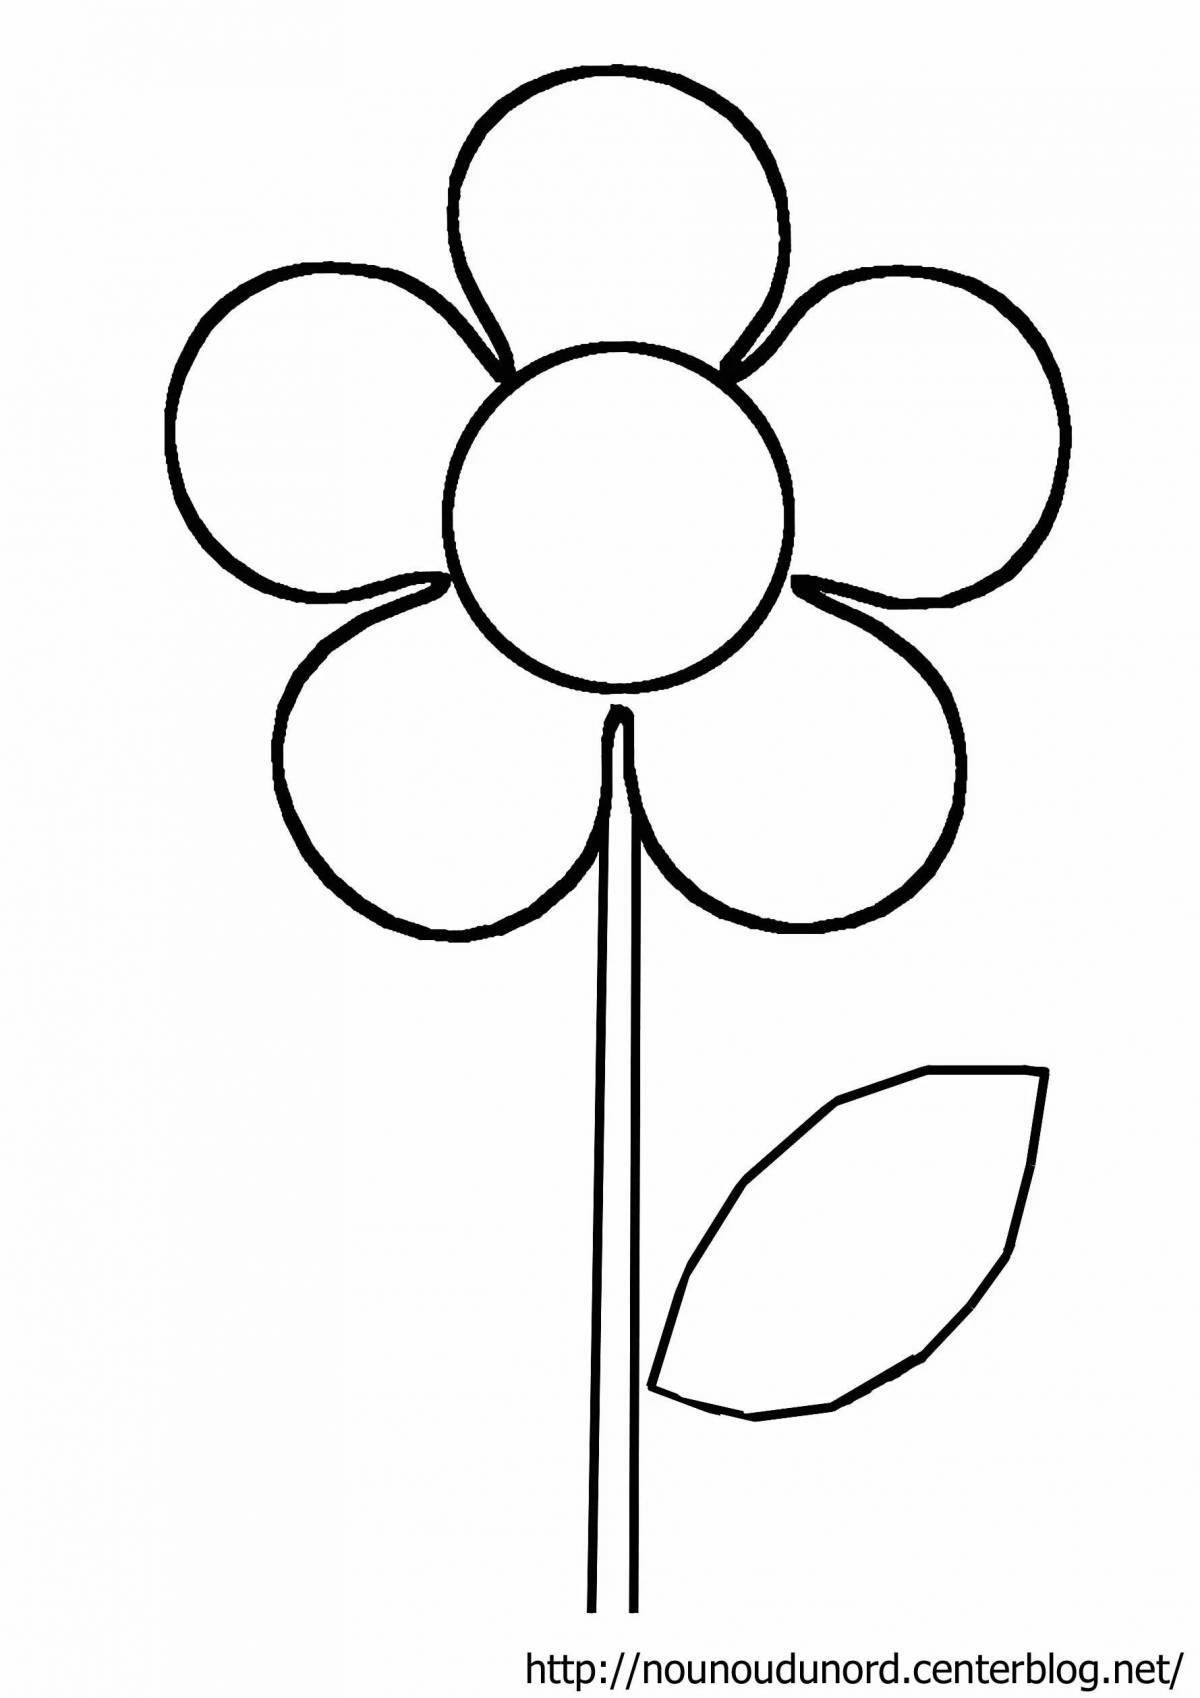 Coloring page playful chamomile flower